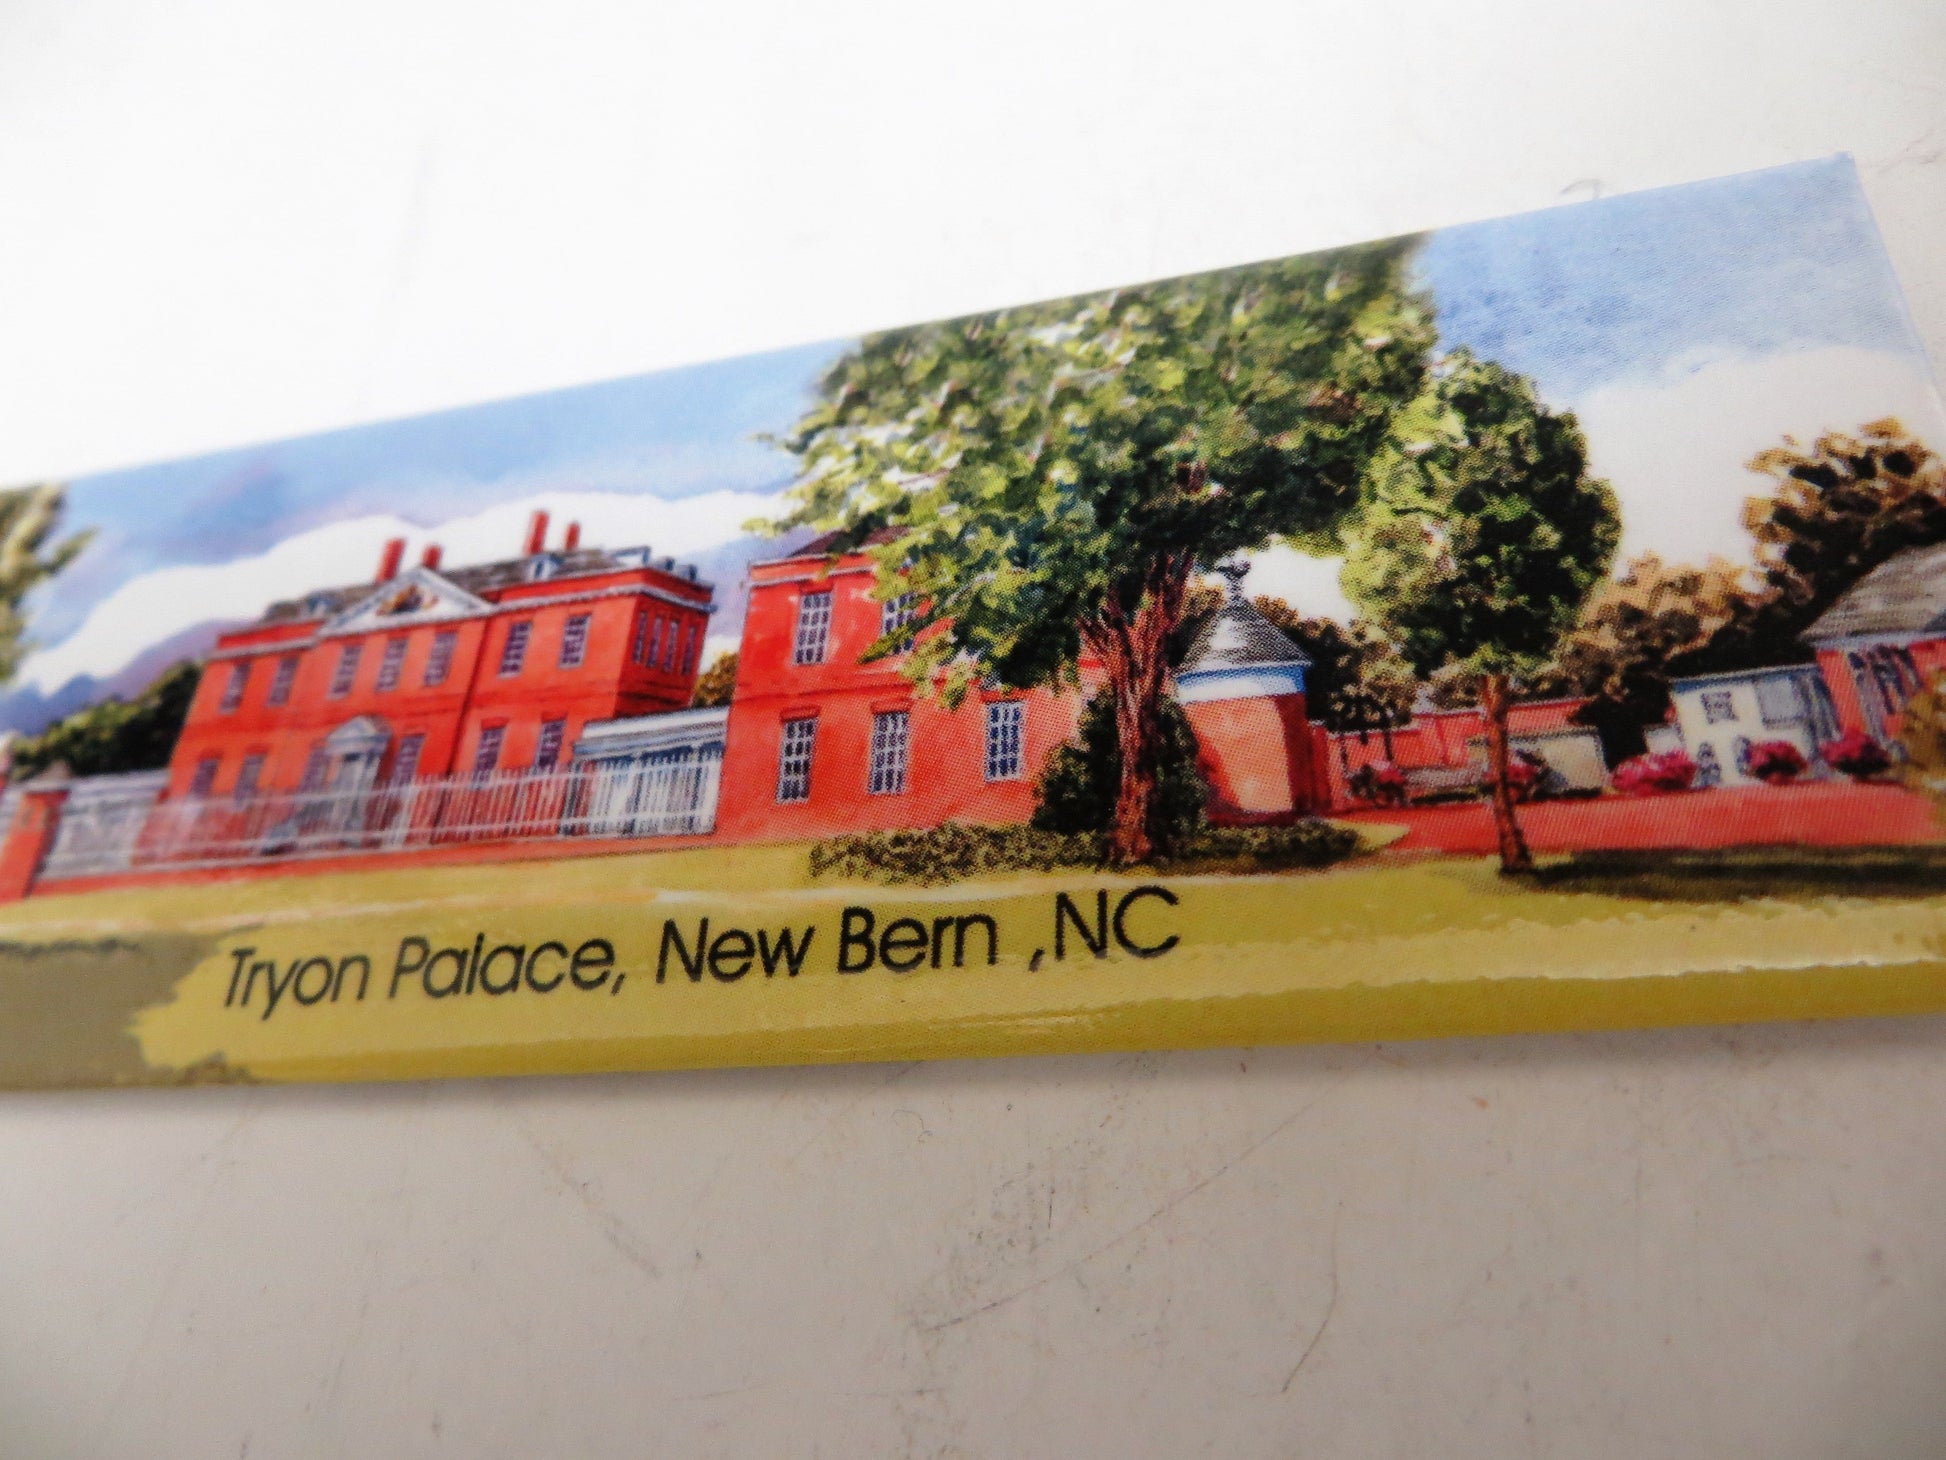 Jan Francouer Tryon Palace Panorama Magnet🎨 Gifts🎨 Buy Art at Carolina Creations Gallery in Downtown New Bern🎨